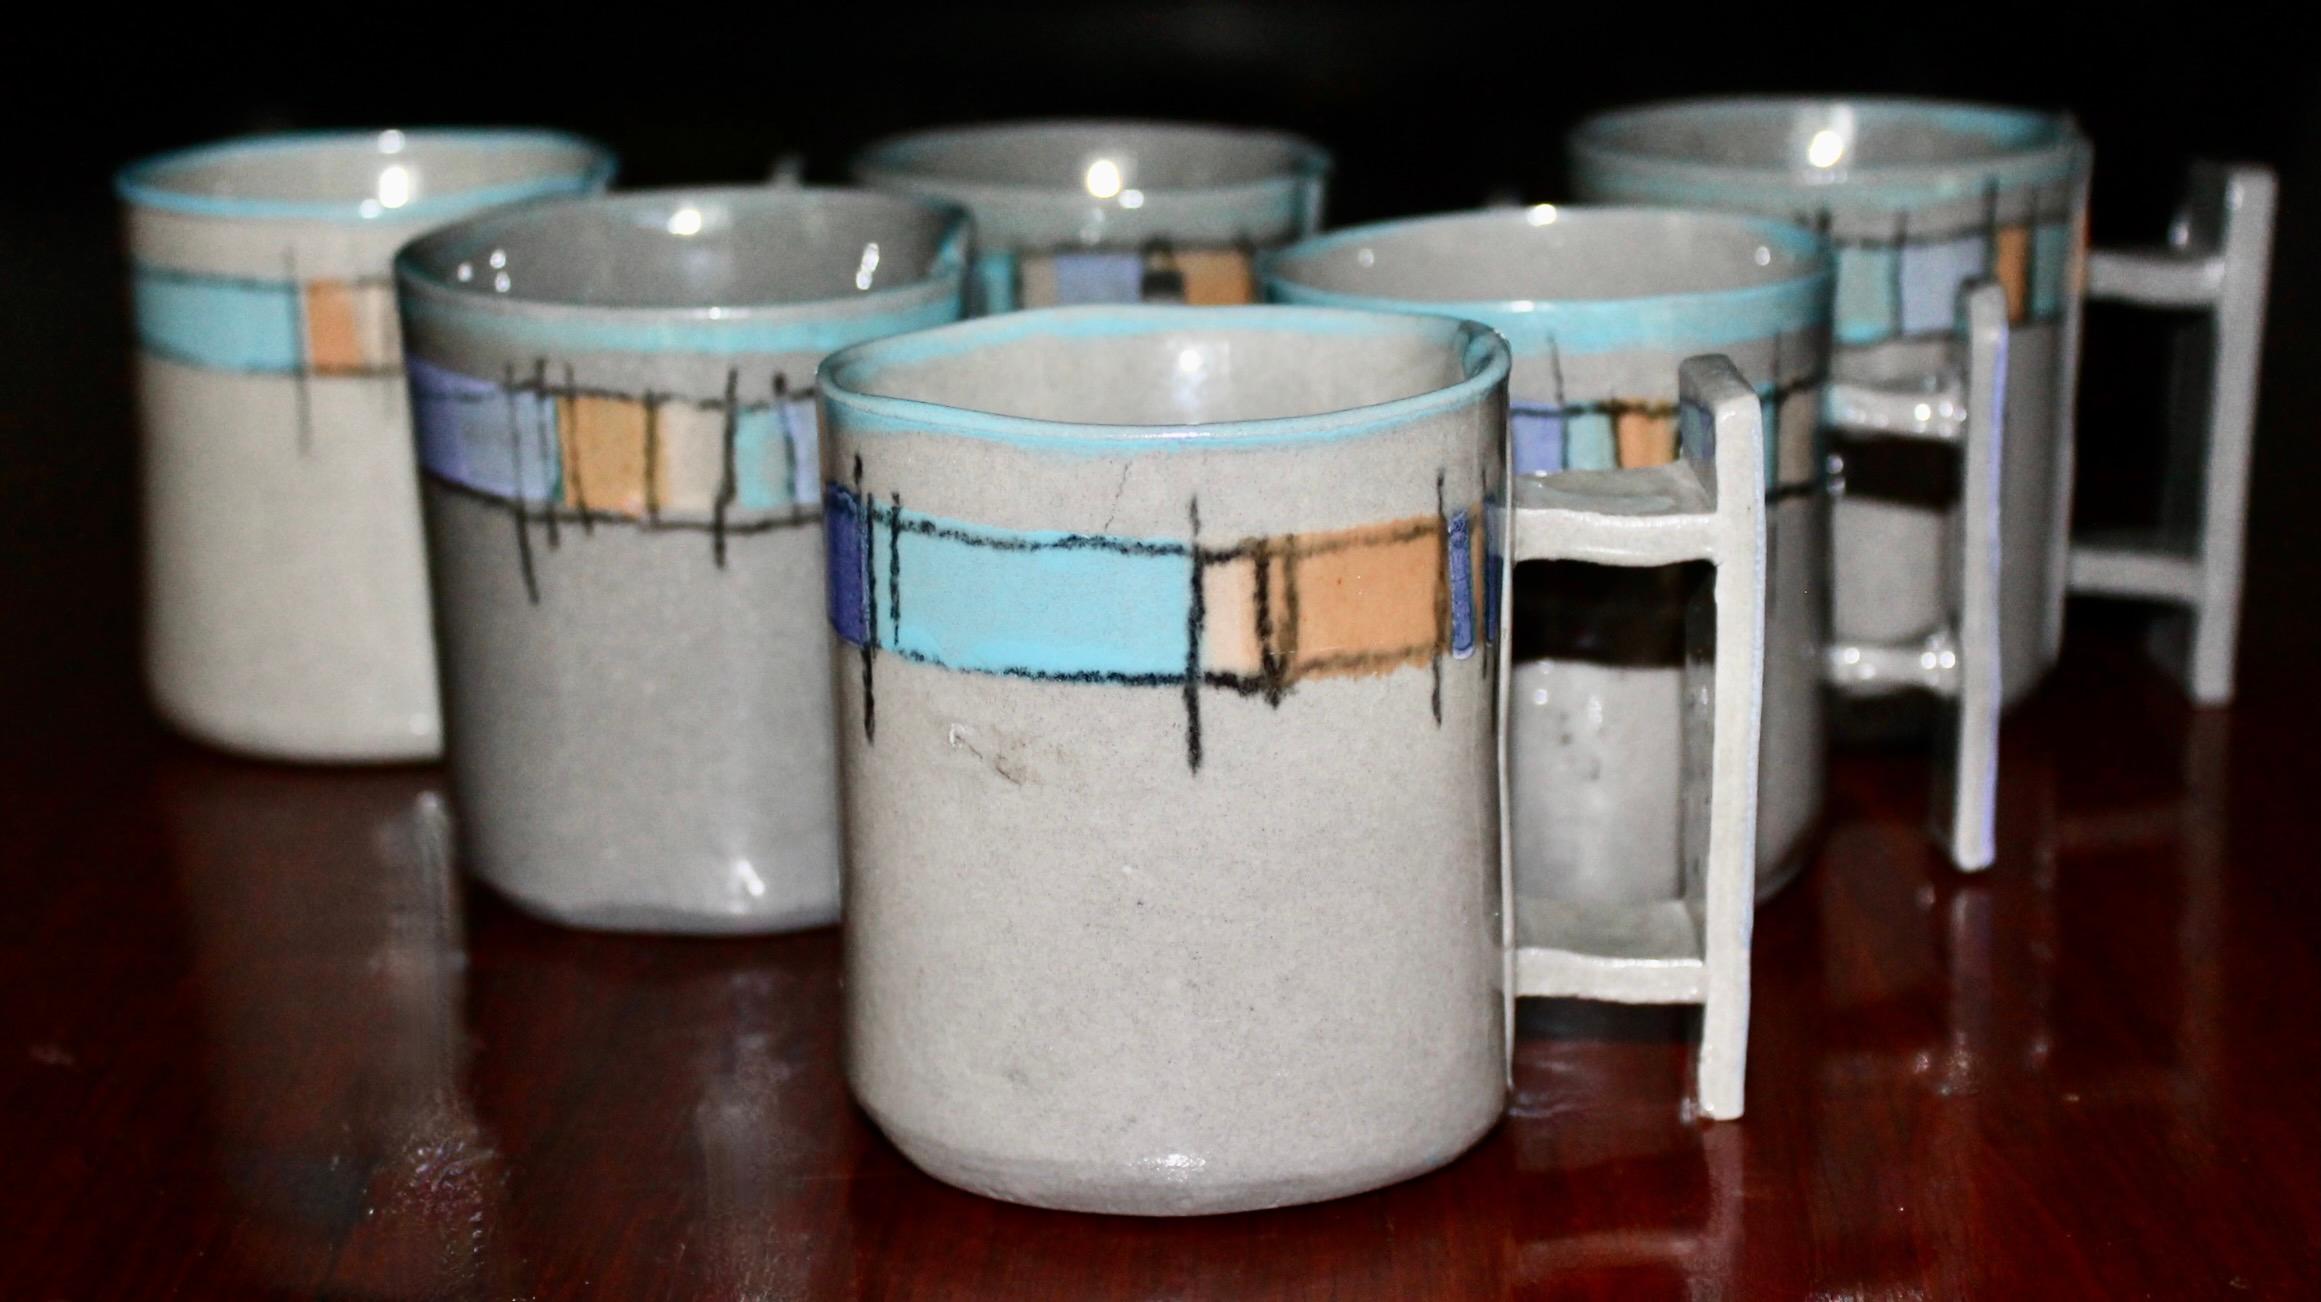 Rare Dorothy Hafner early (1977) set of 6 gray ceramic mugs hand-crafted by this important designer/maker..